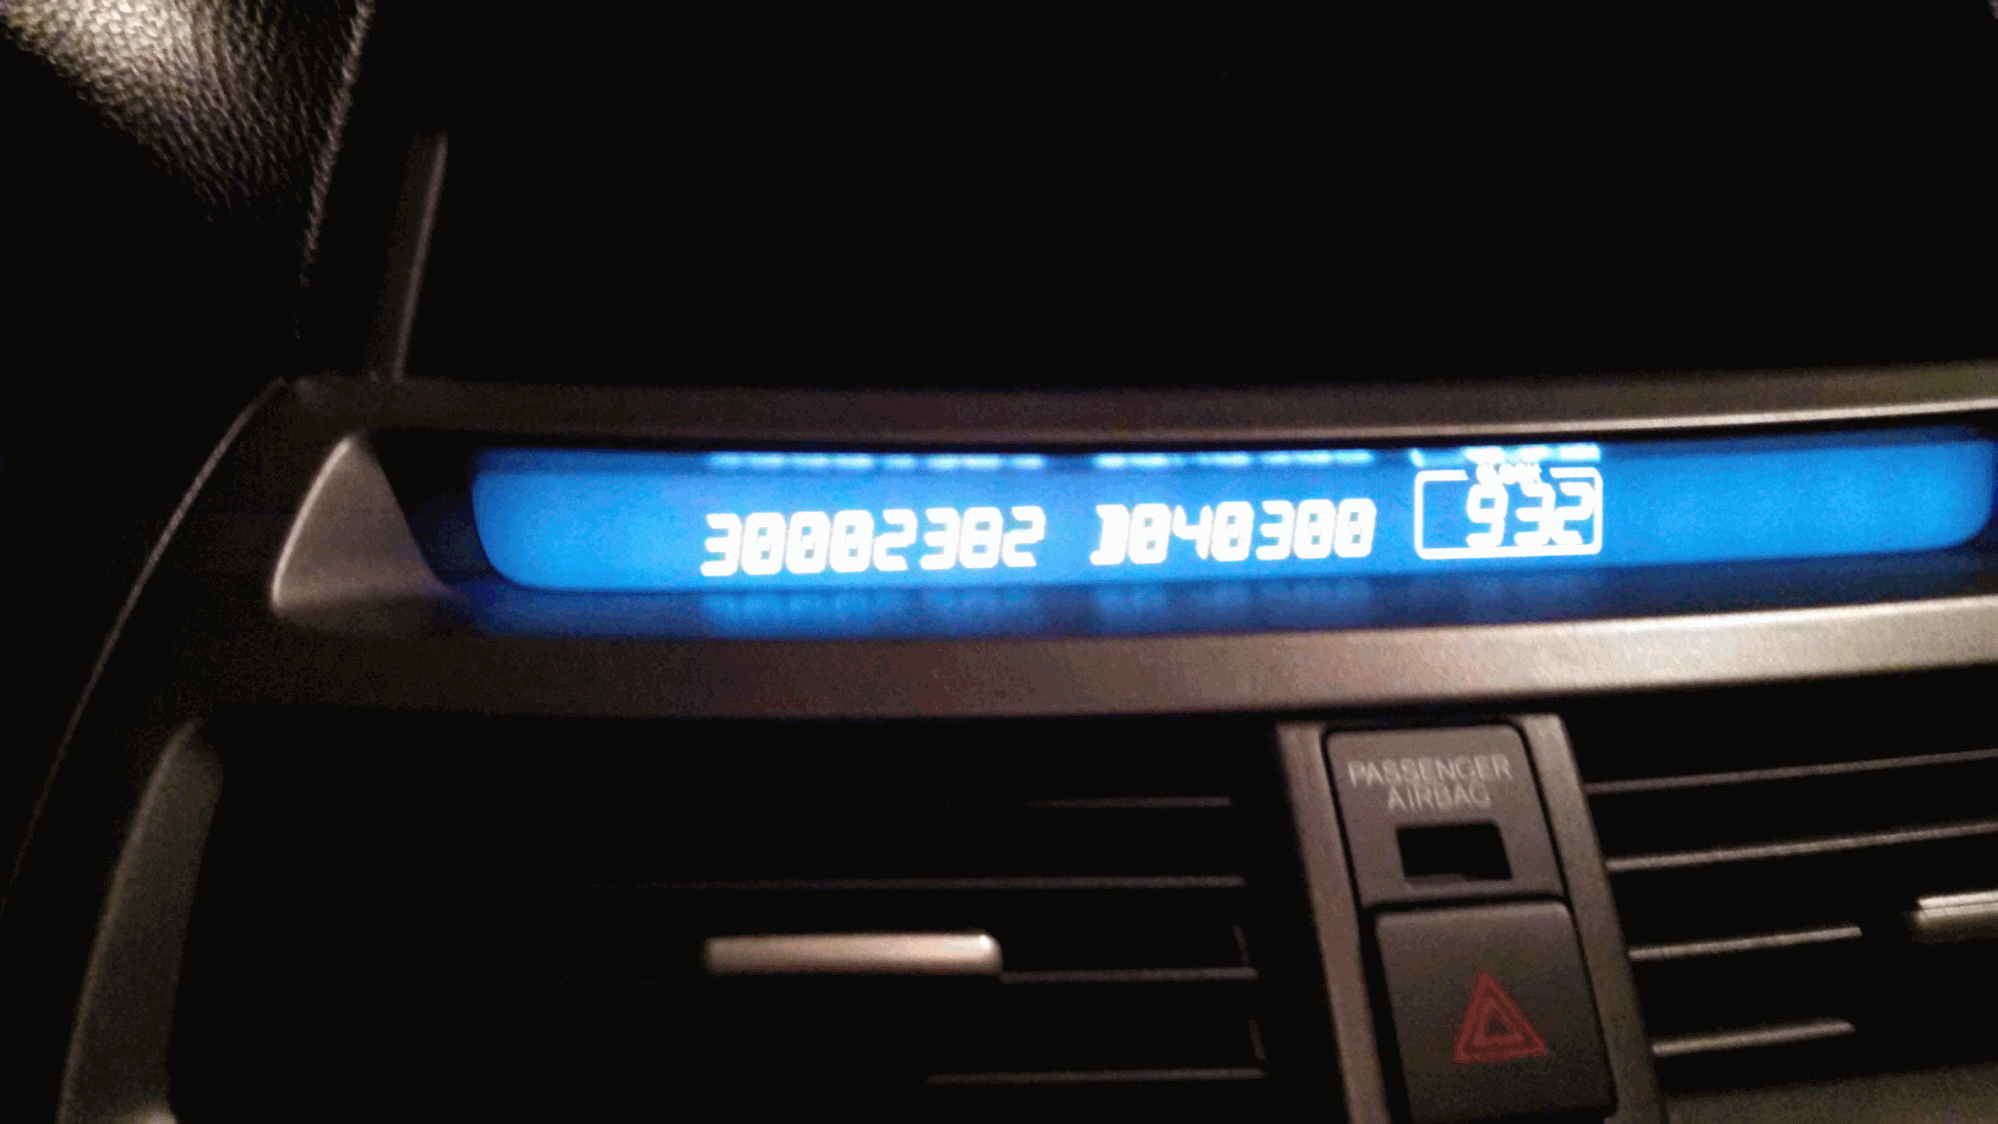 What is the radio code for the Honda Civic EX?